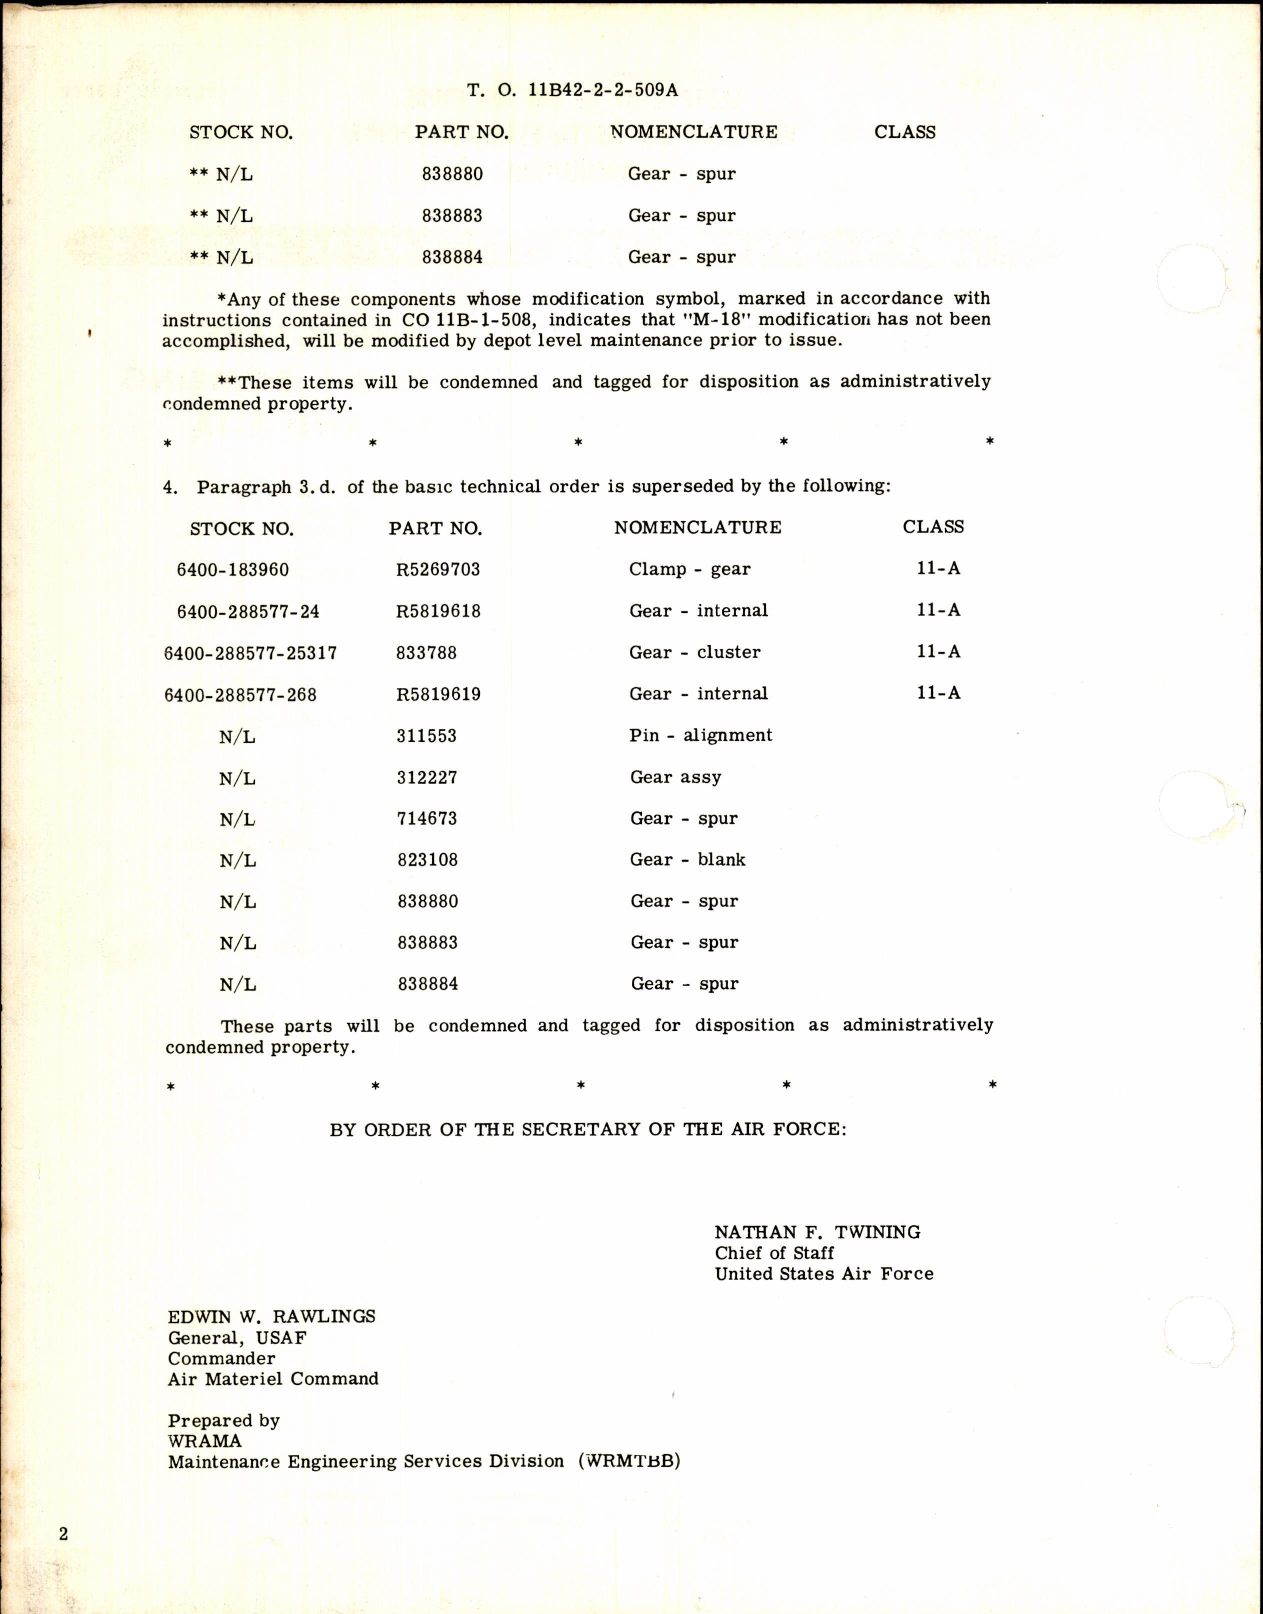 Sample page 2 from AirCorps Library document: Internal Ring Gears for Periscopic Bombsight Stabilizer B-1